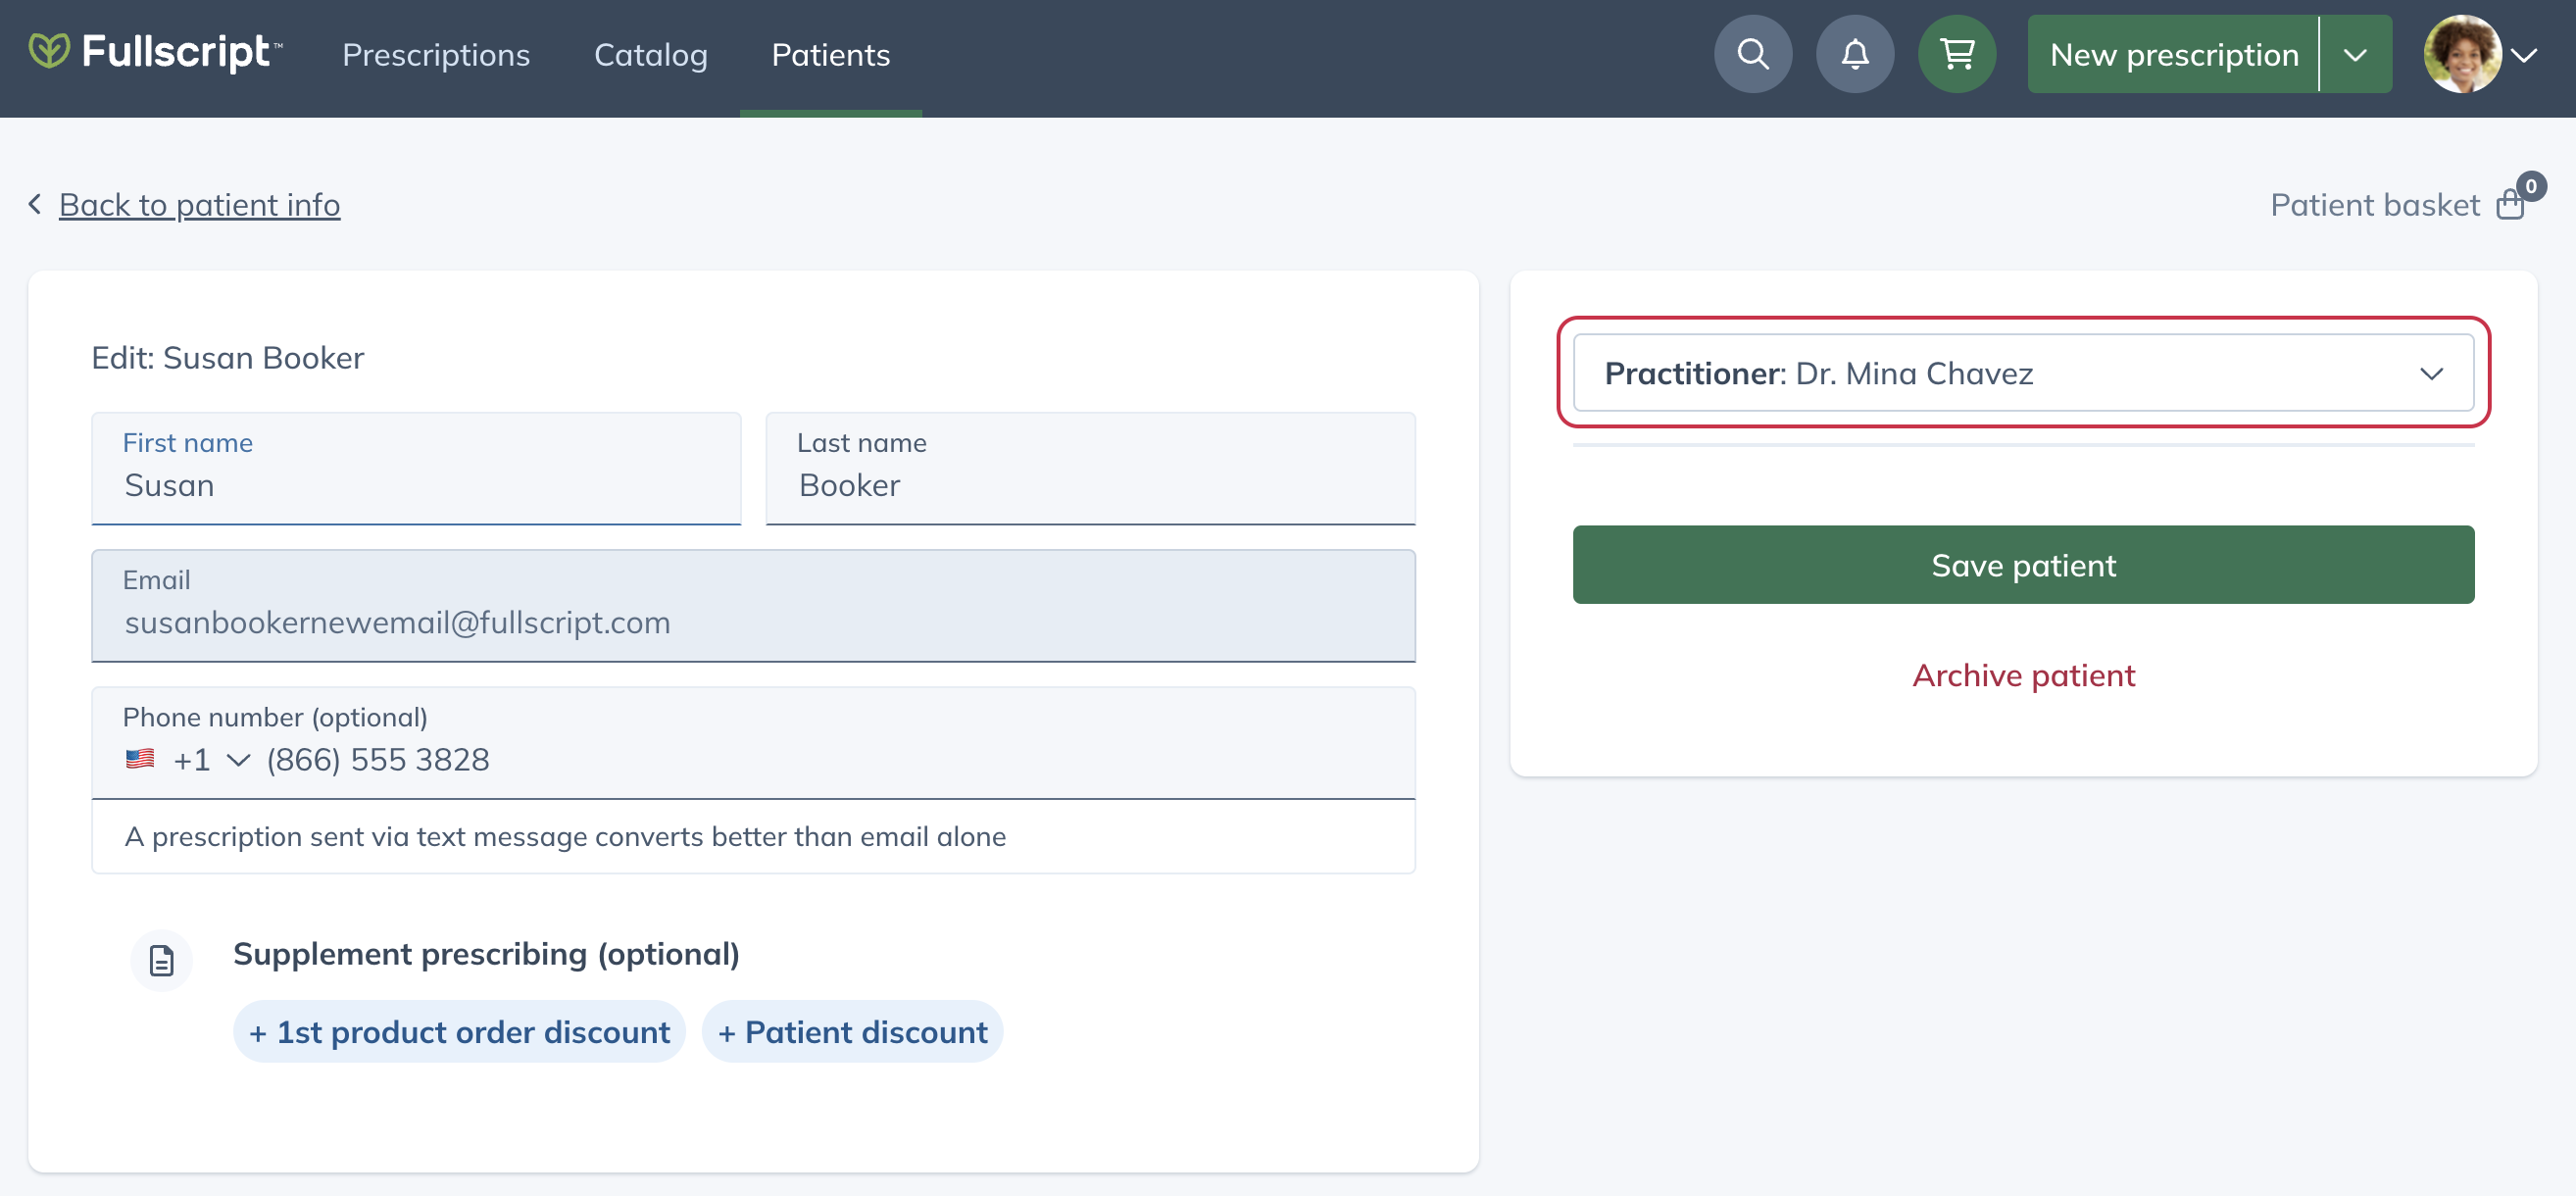 Click the Practitioner drop-down menu and select all practitioners that should have access to the patient.